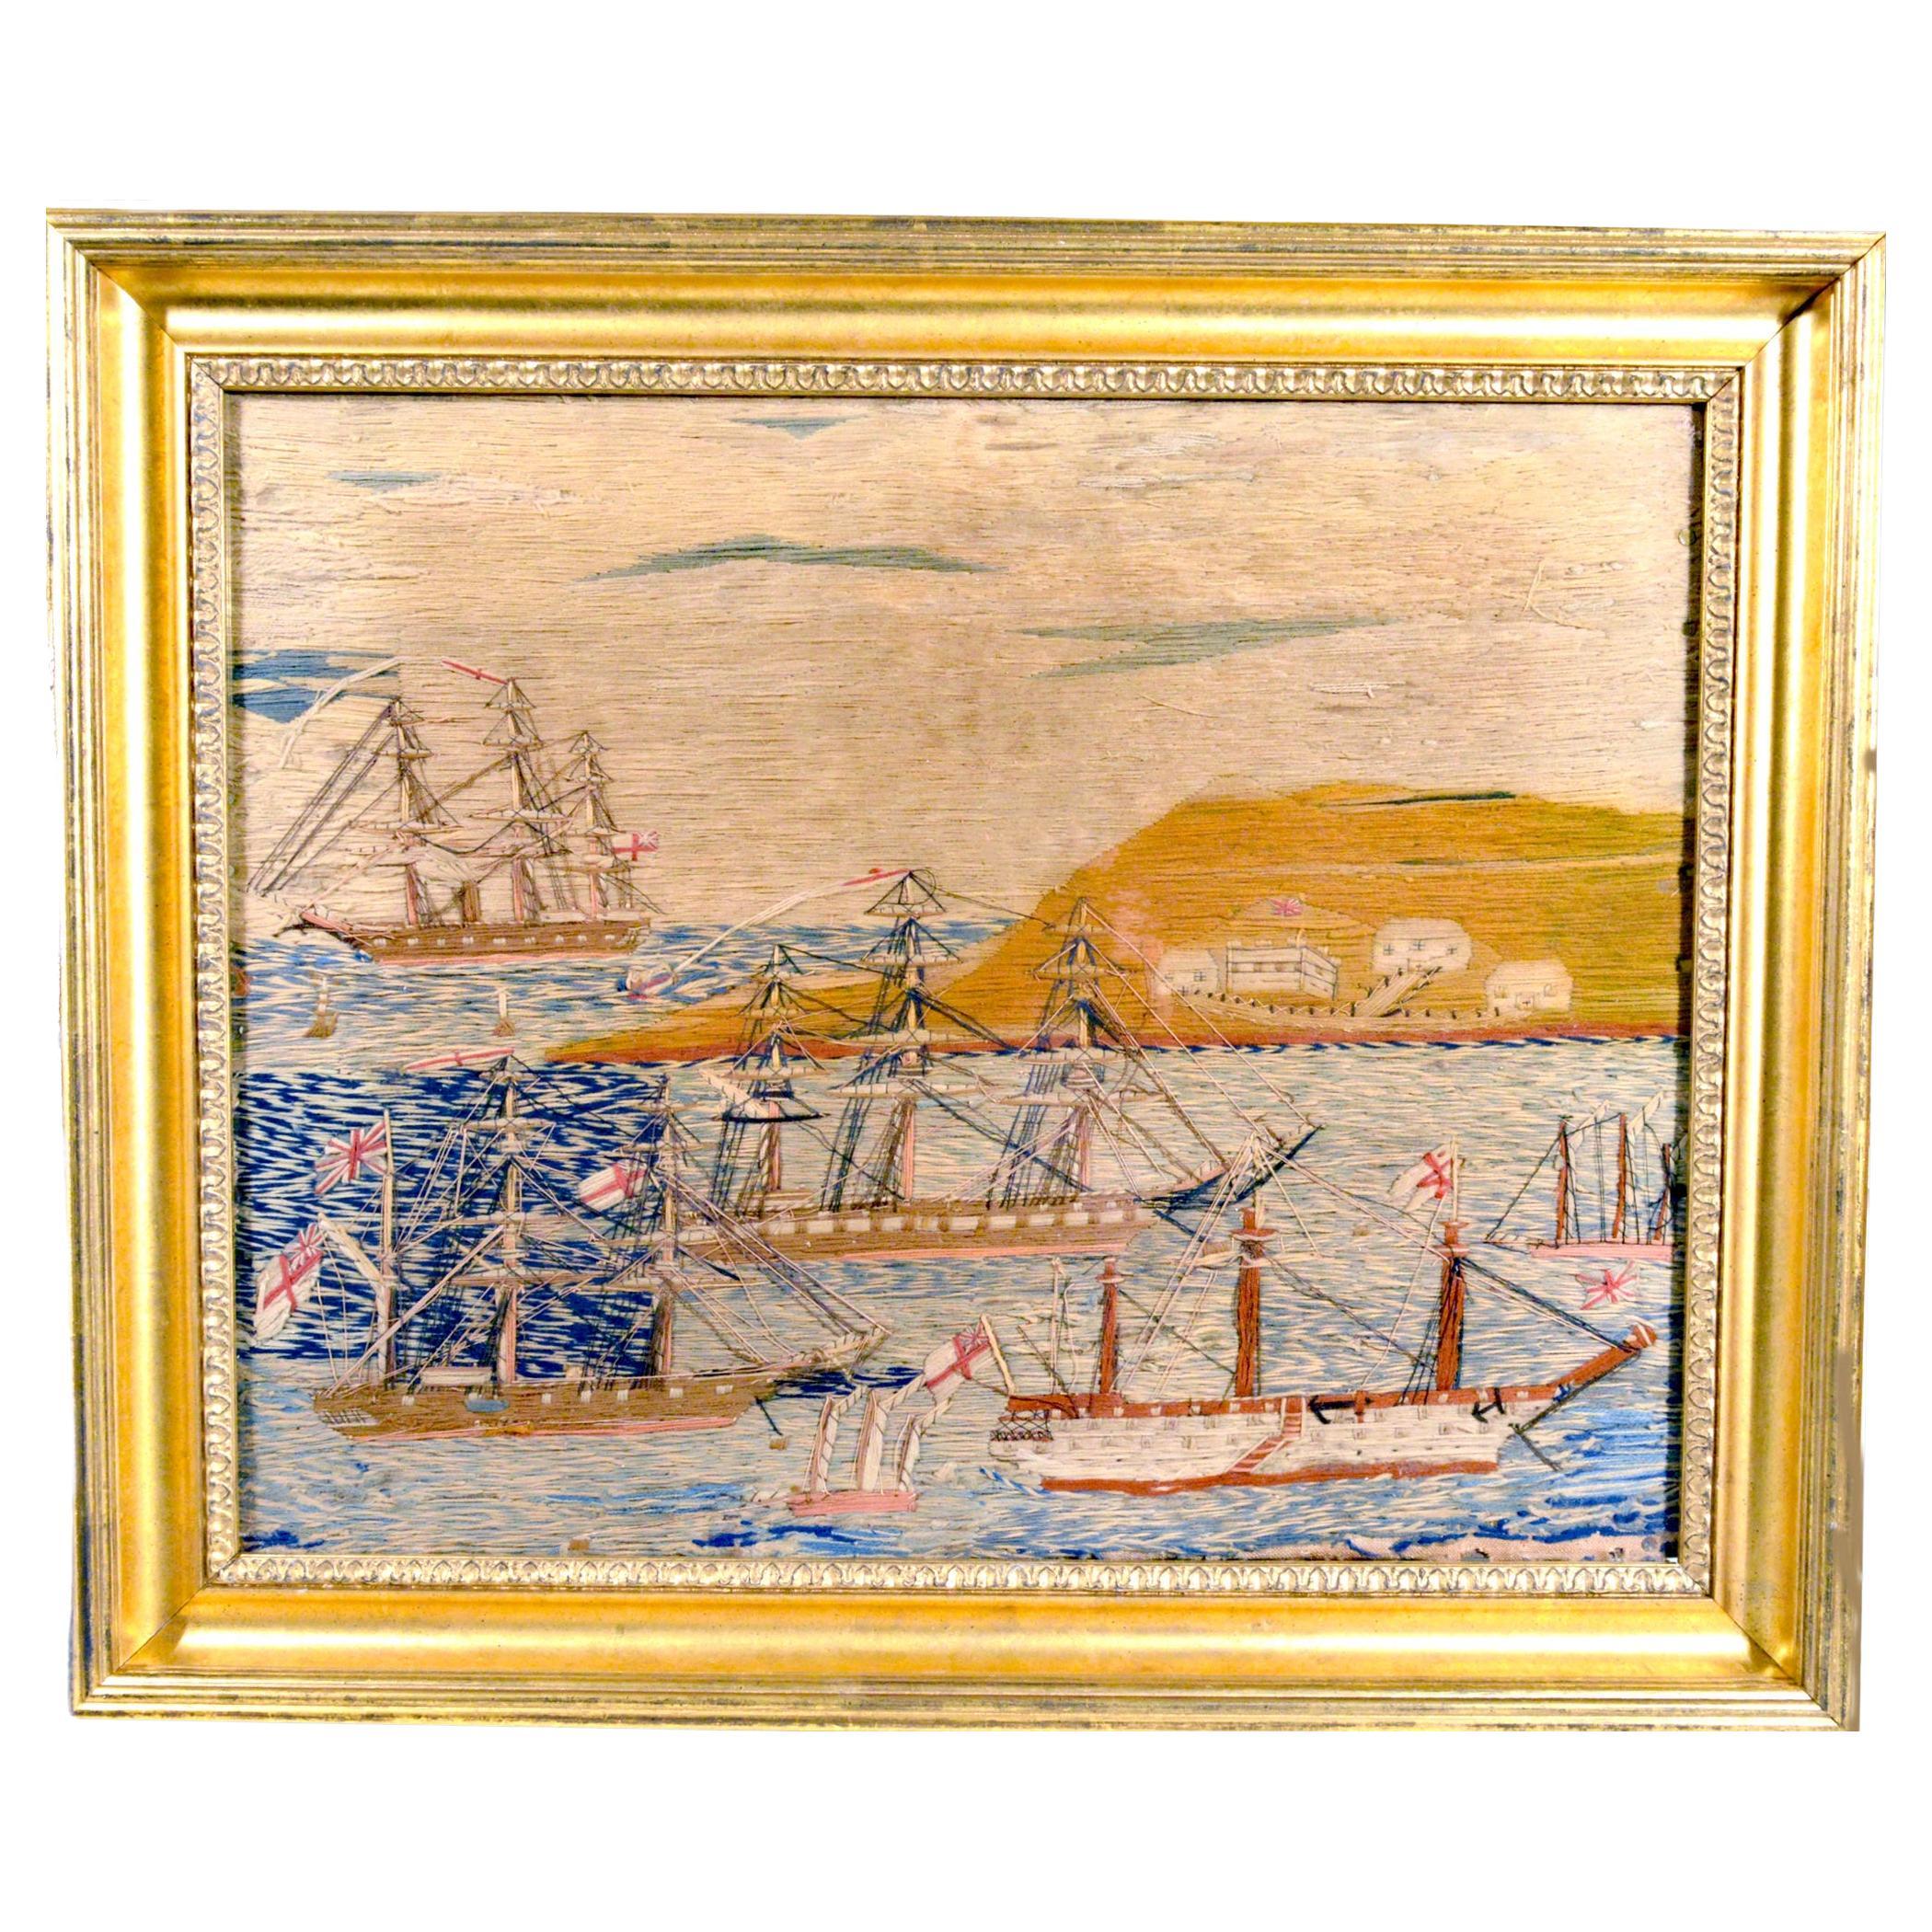 English Sailor's Woolwork or Woolie with Multiple Ships in a Bay